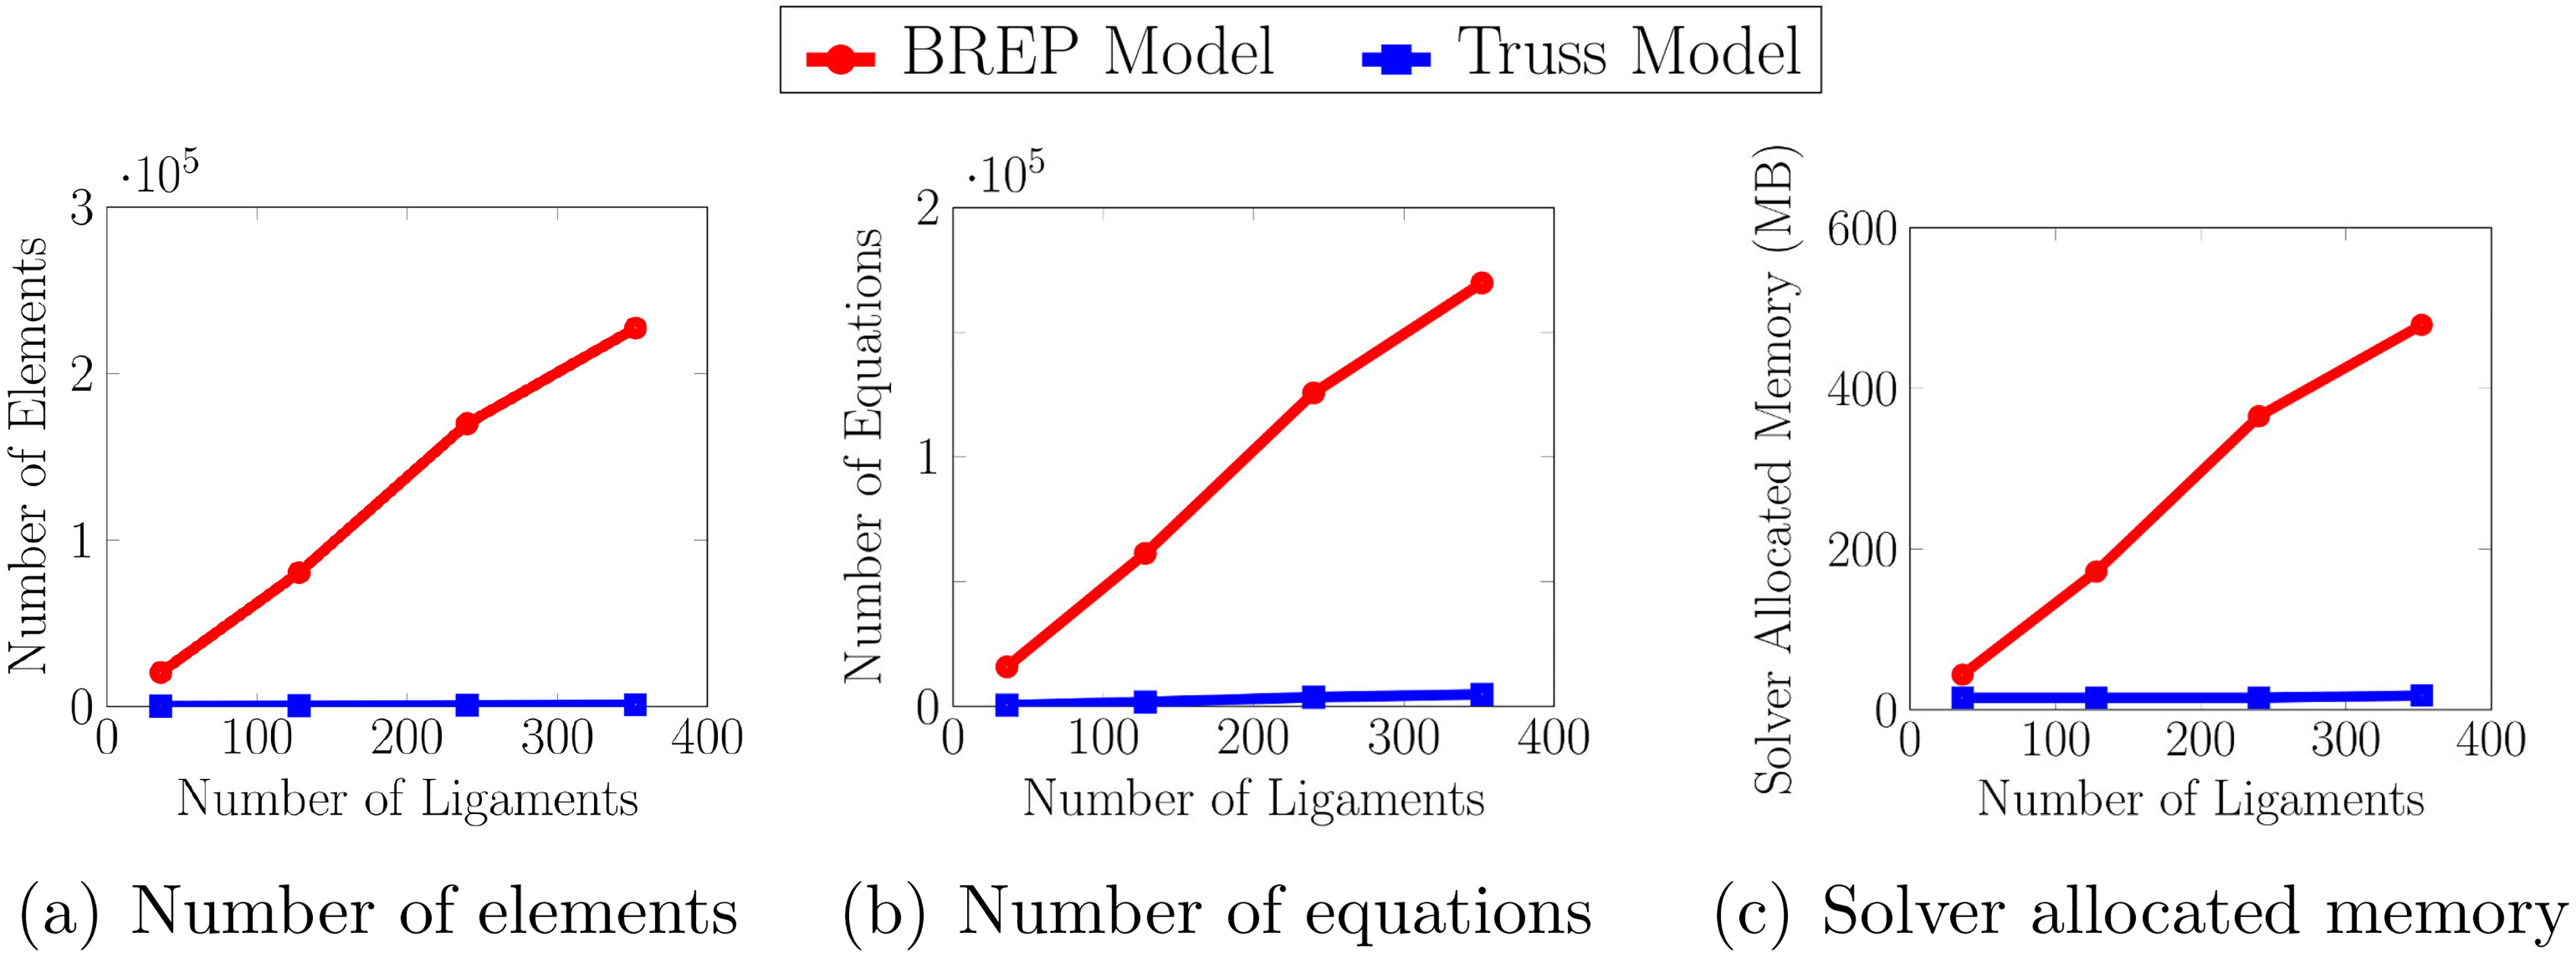 Comparison of the computational expenses of the BREP and Truss models.